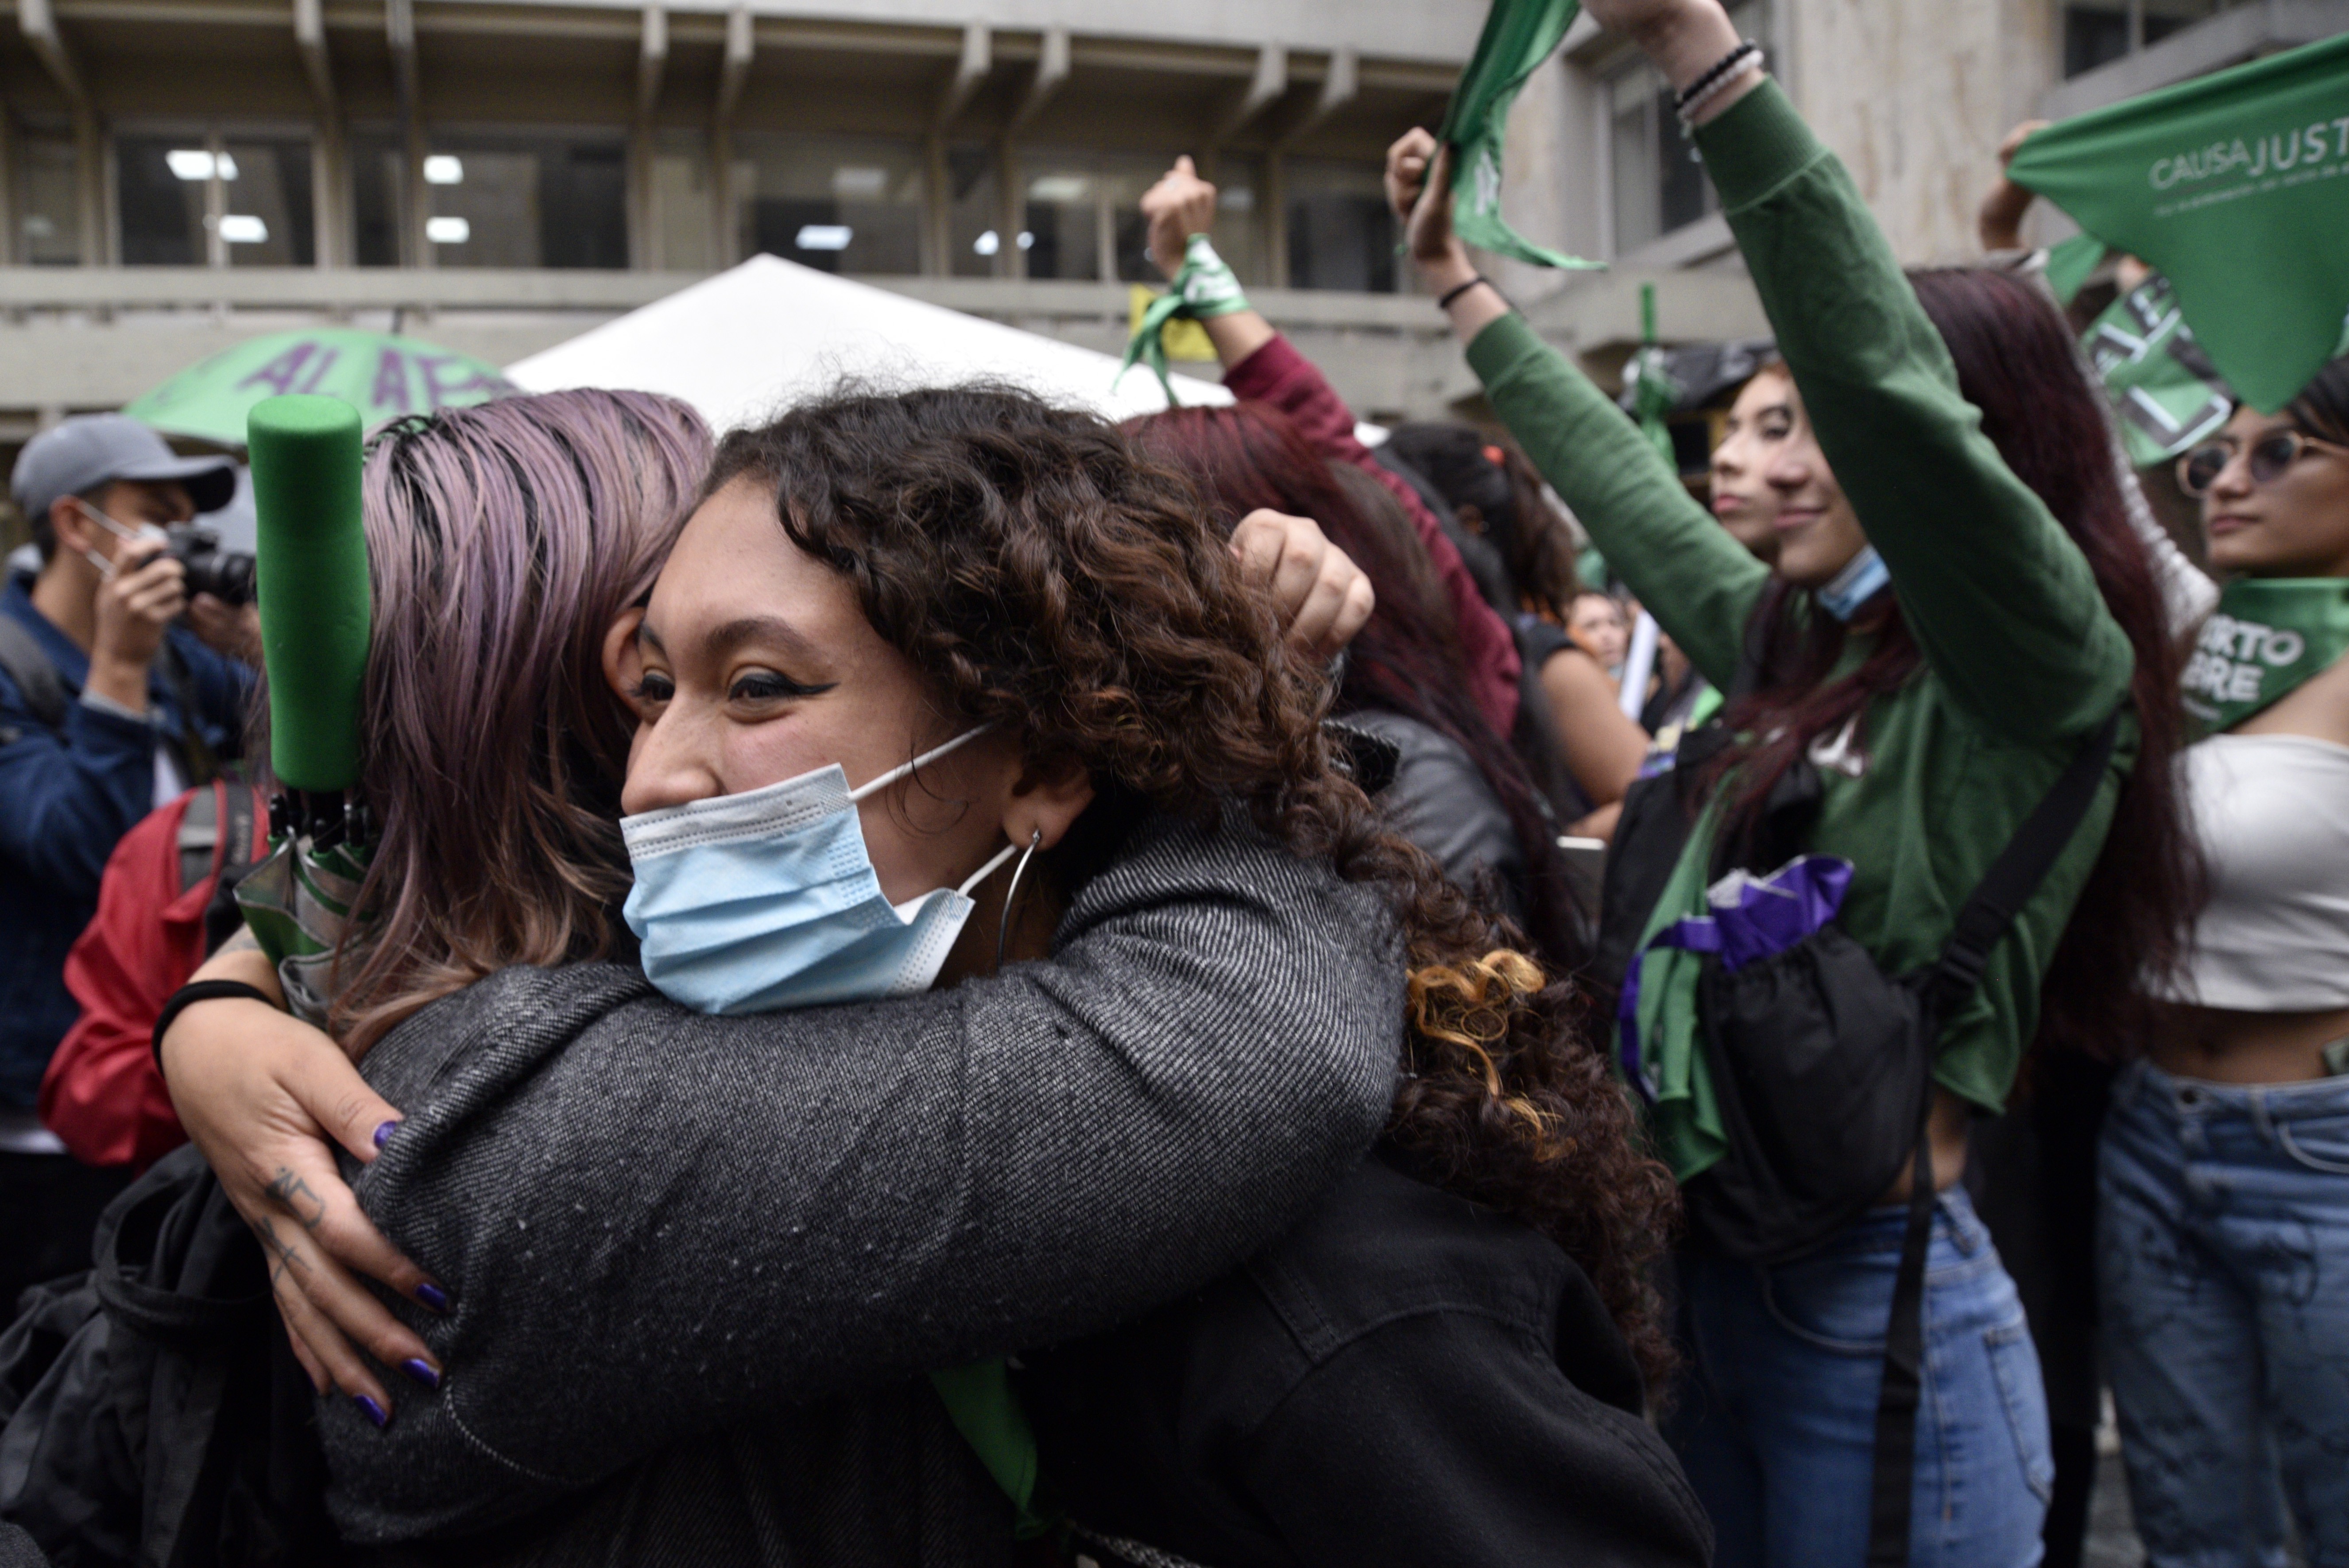 BOGOTA, COLOMBIA - FEBRUARY 21: Pro-Choice demonstrators embrace as they celebrate outside the Justice Palace after the Constitutional Court voted in favor of decriminalizing abortion up to 24 weeks of gestation on February 21, 2022 in Bogota, Colombia. S (Foto: Getty Images)